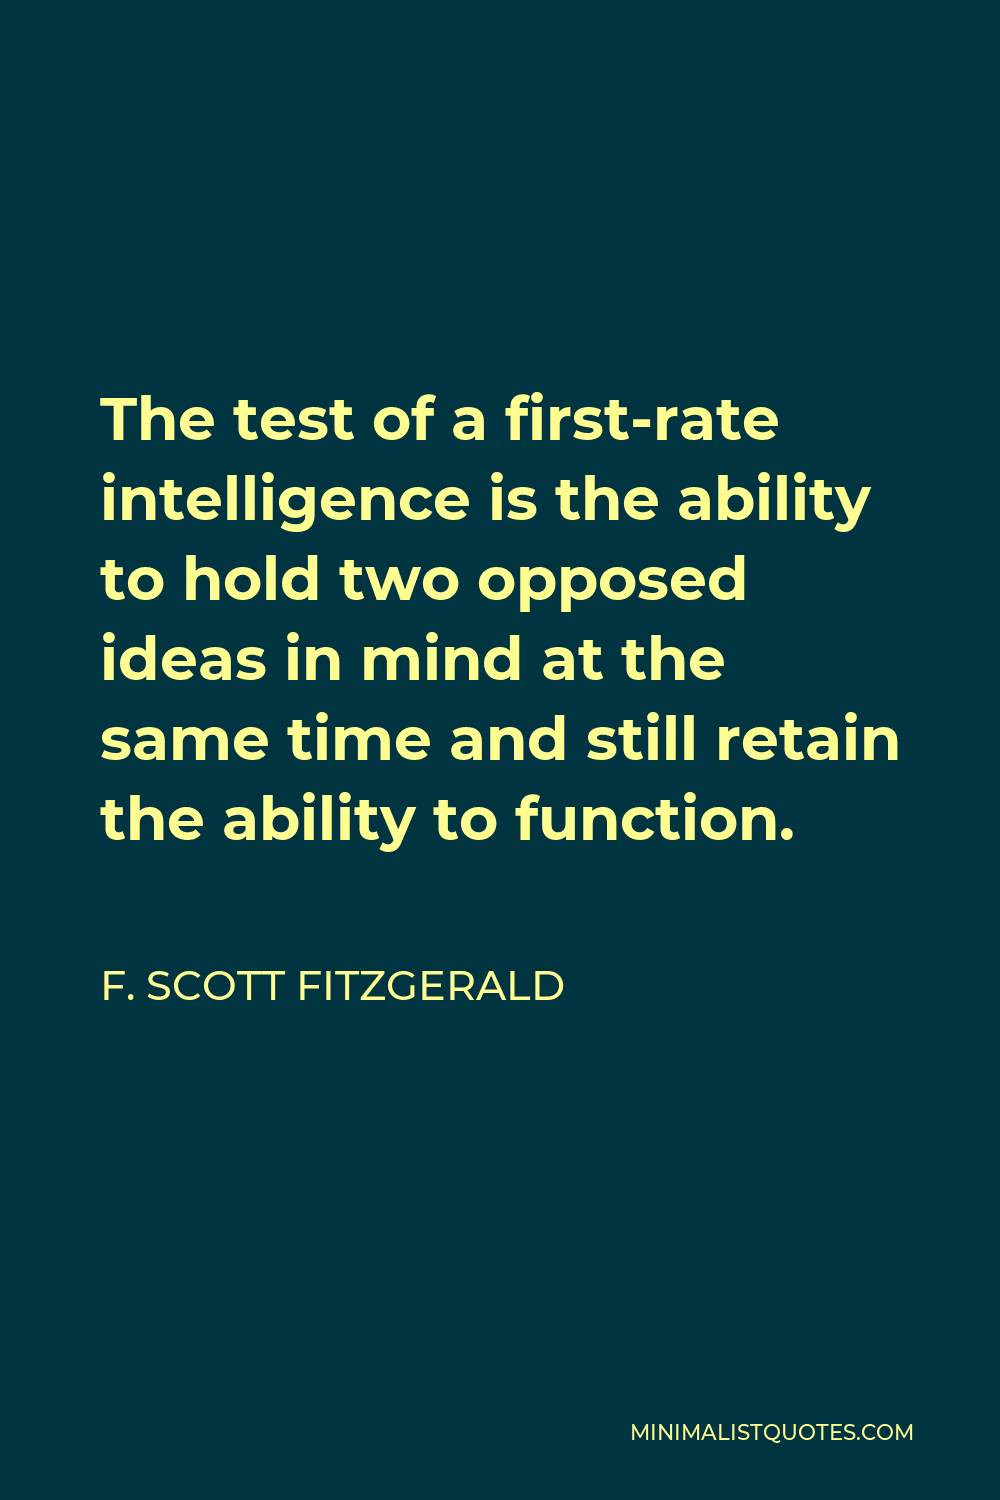 F. Scott Fitzgerald Quote - The test of a first-rate intelligence is the ability to hold two opposed ideas in mind at the same time and still retain the ability to function.